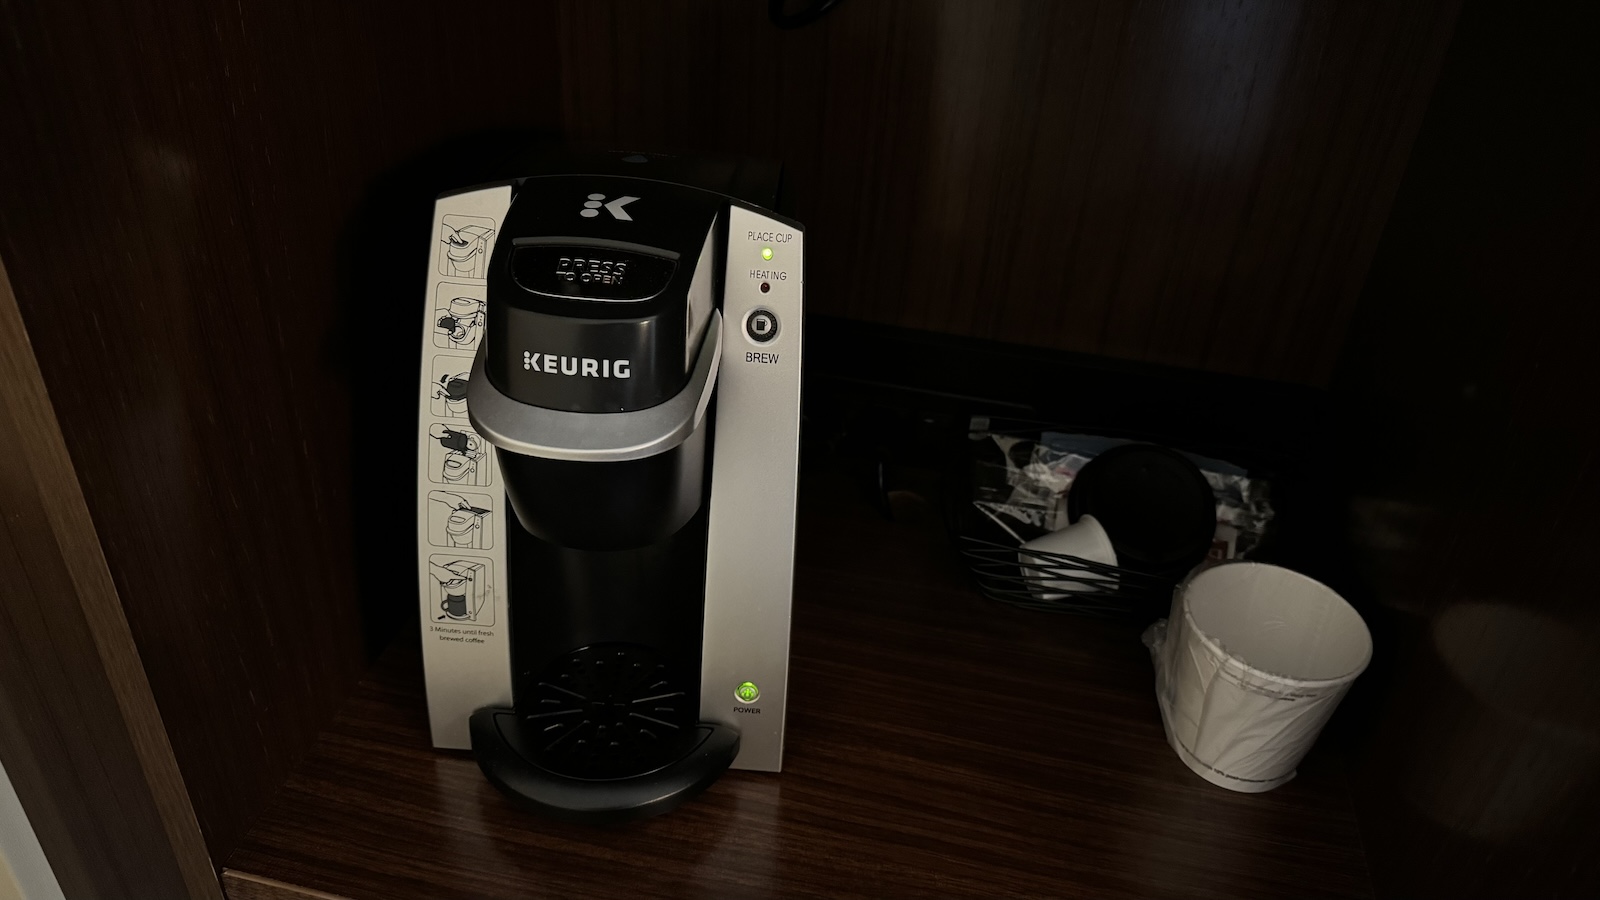 Keurig Coffee Machine Won’t Brew without a Cup in Place